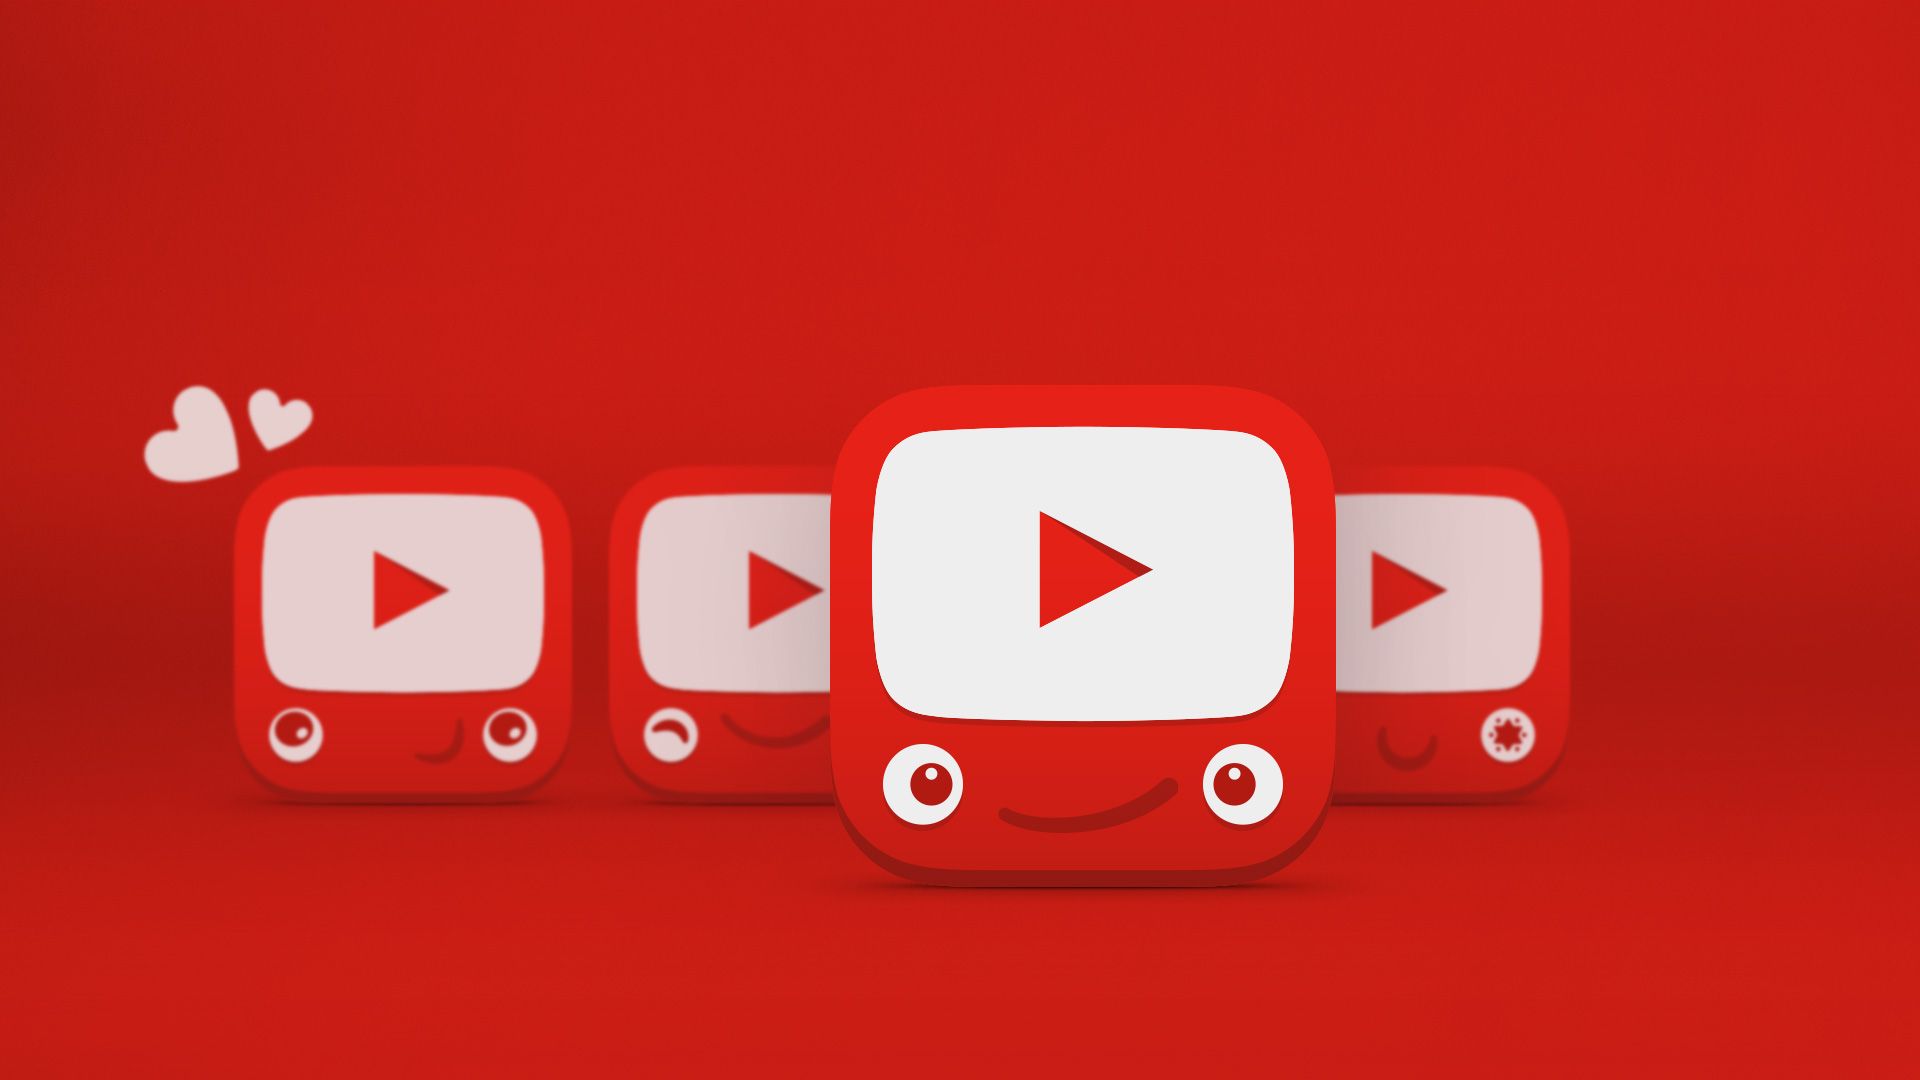 YouTube Wallpaper HD. YouTube Wallpaper, Awesome YouTube Background and Cute YouTube Background